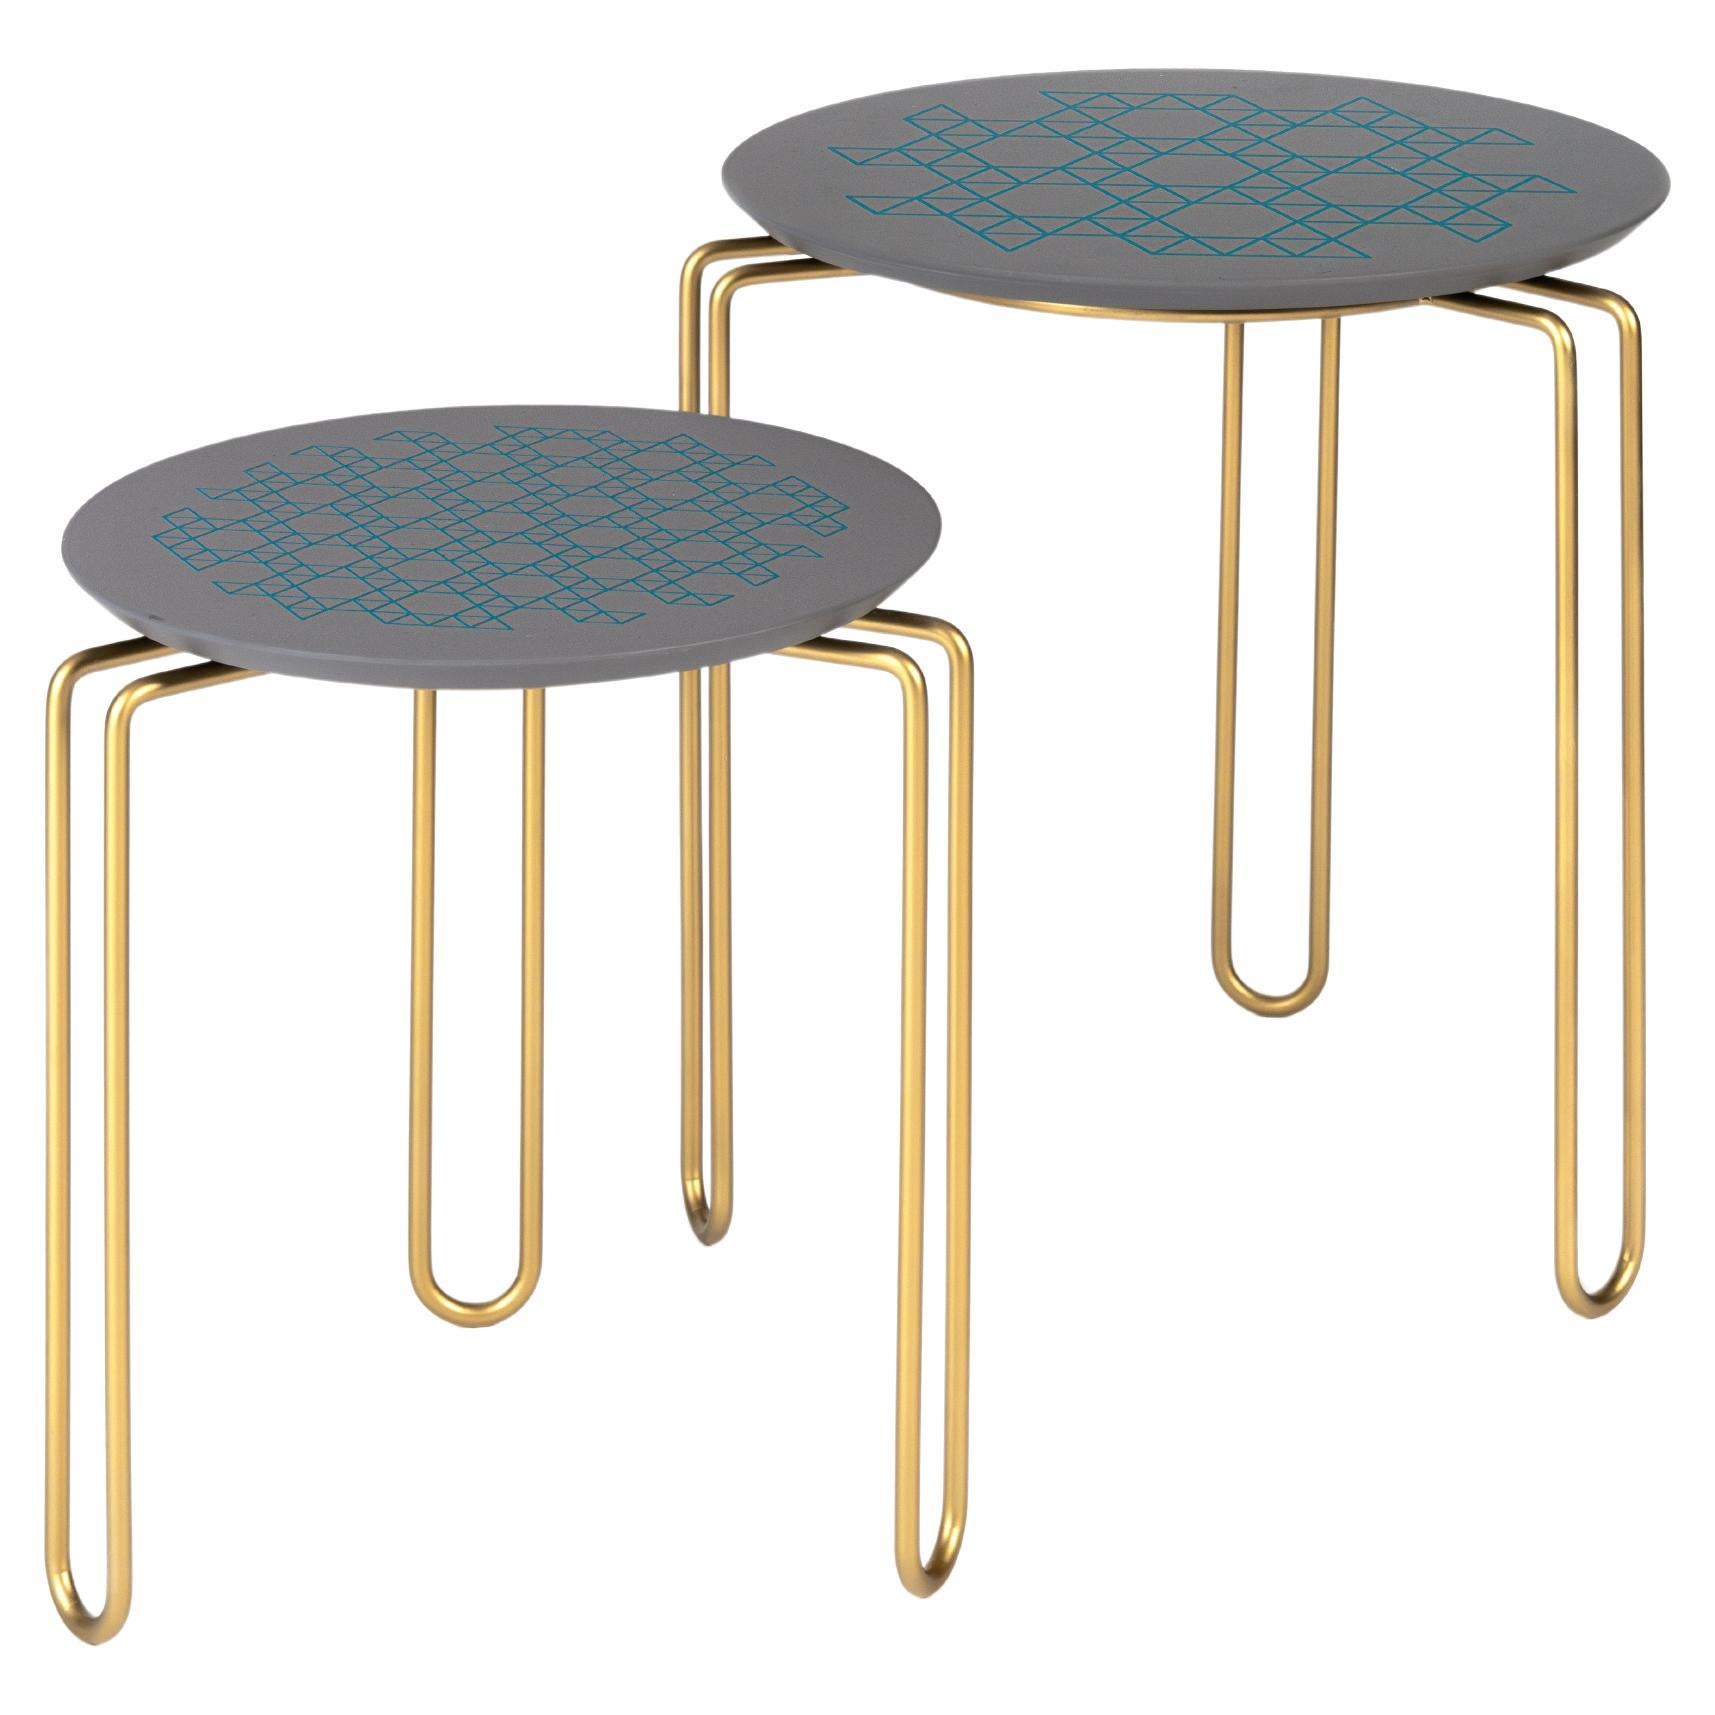 Set of 2 Caleido Coffee Table by Mentemano